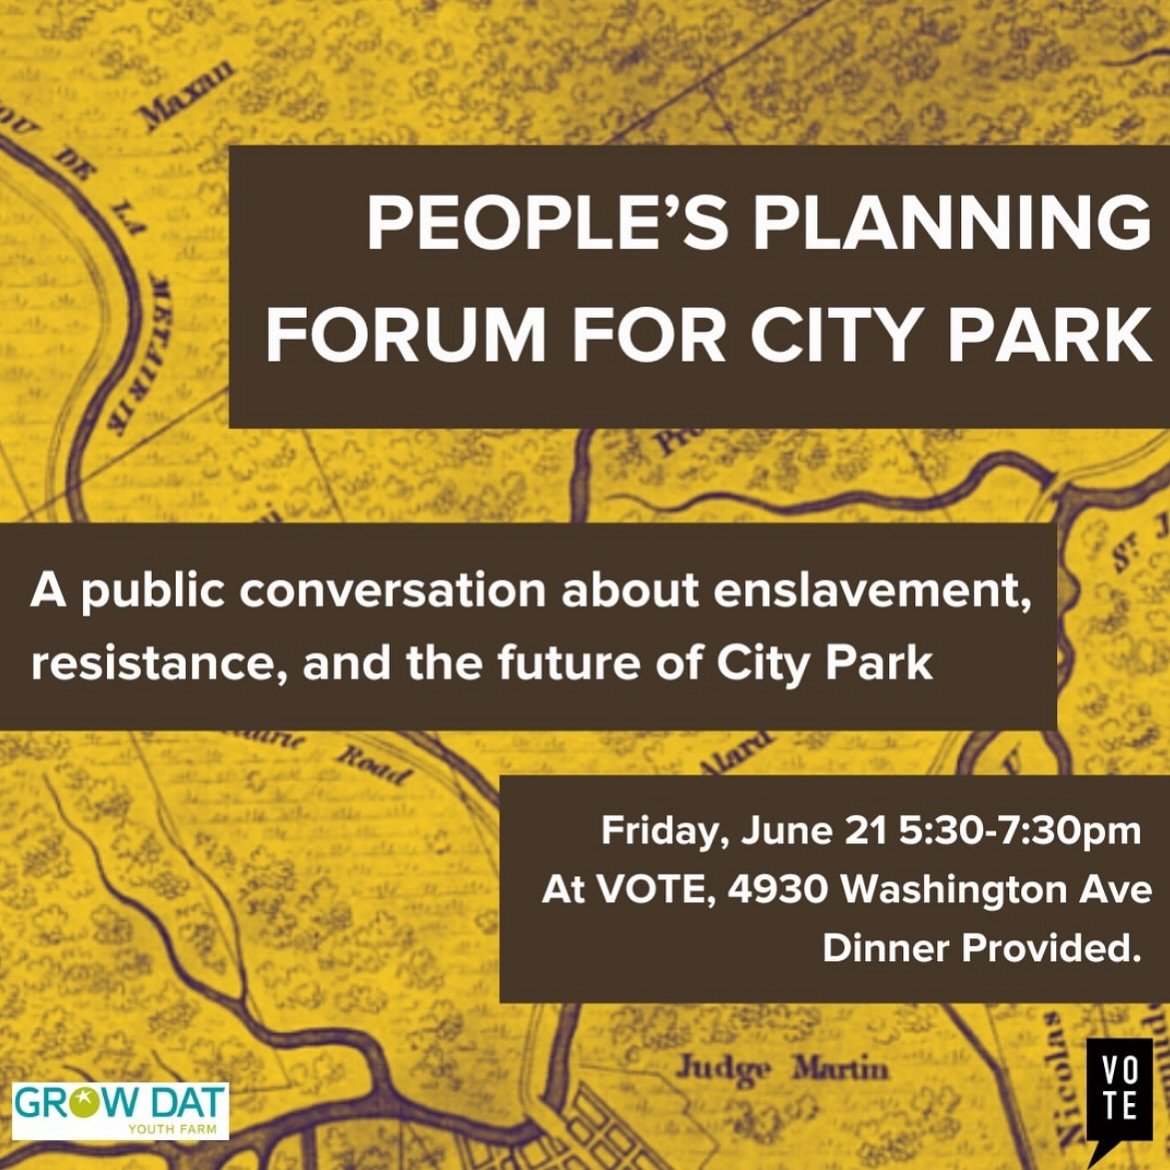 Join Grow Dat and VOTE this Friday at 5:30pm for the People&rsquo;s Planning Forum for City Park! The forum will be a public conversation about histories of enslavement and resistance on the land that is now City Park. We will be exploring how these 